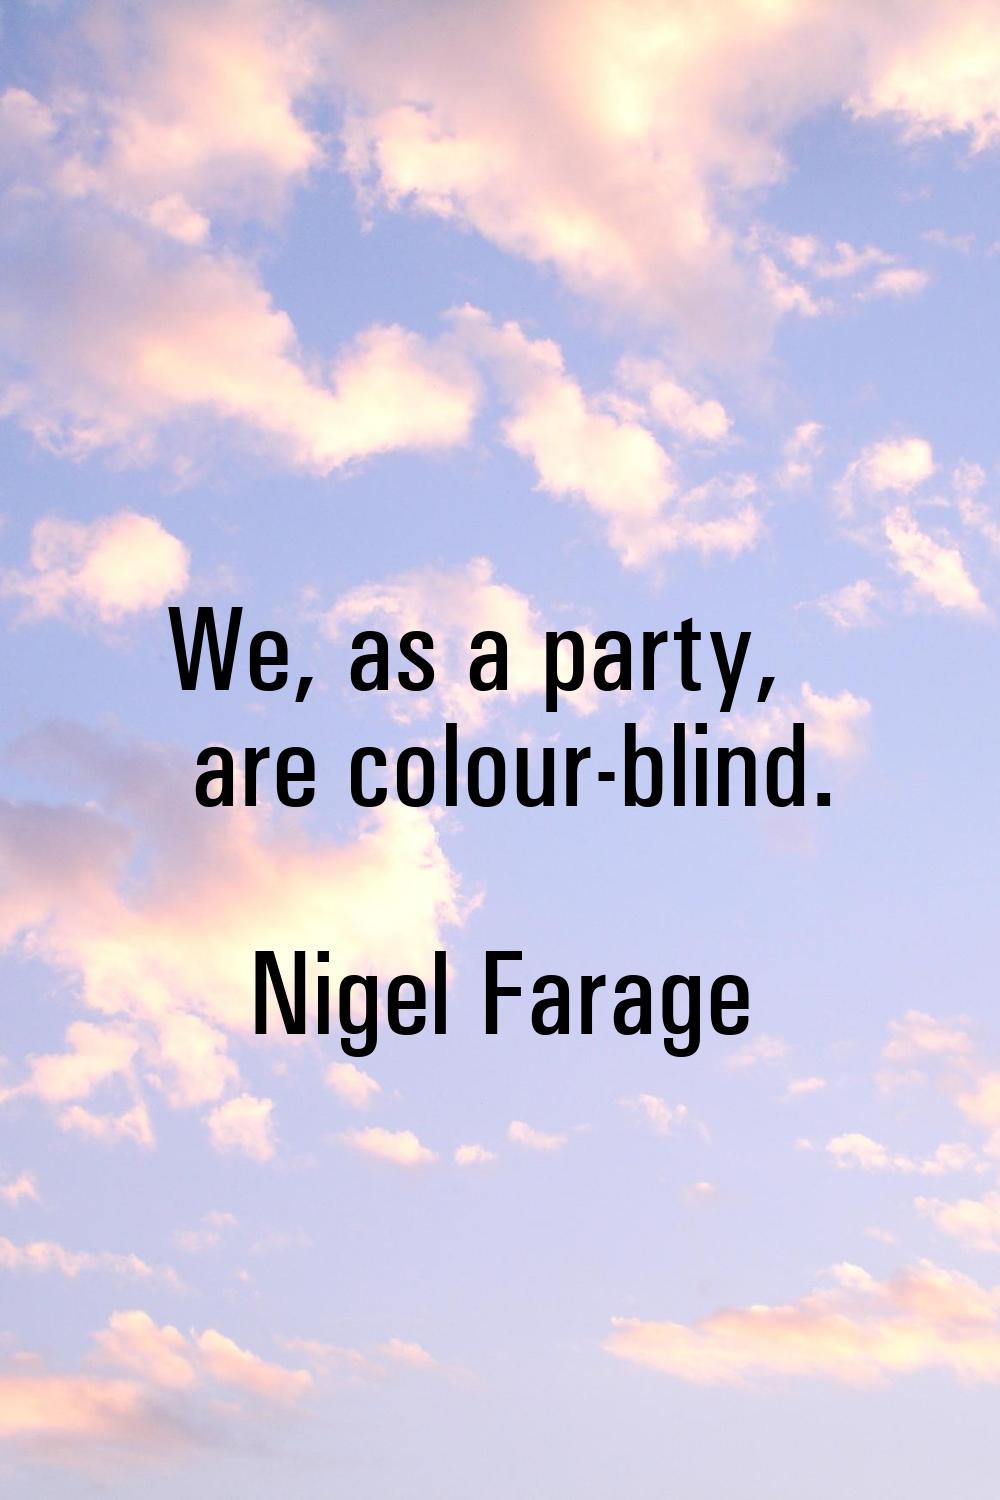 We, as a party, are colour-blind.